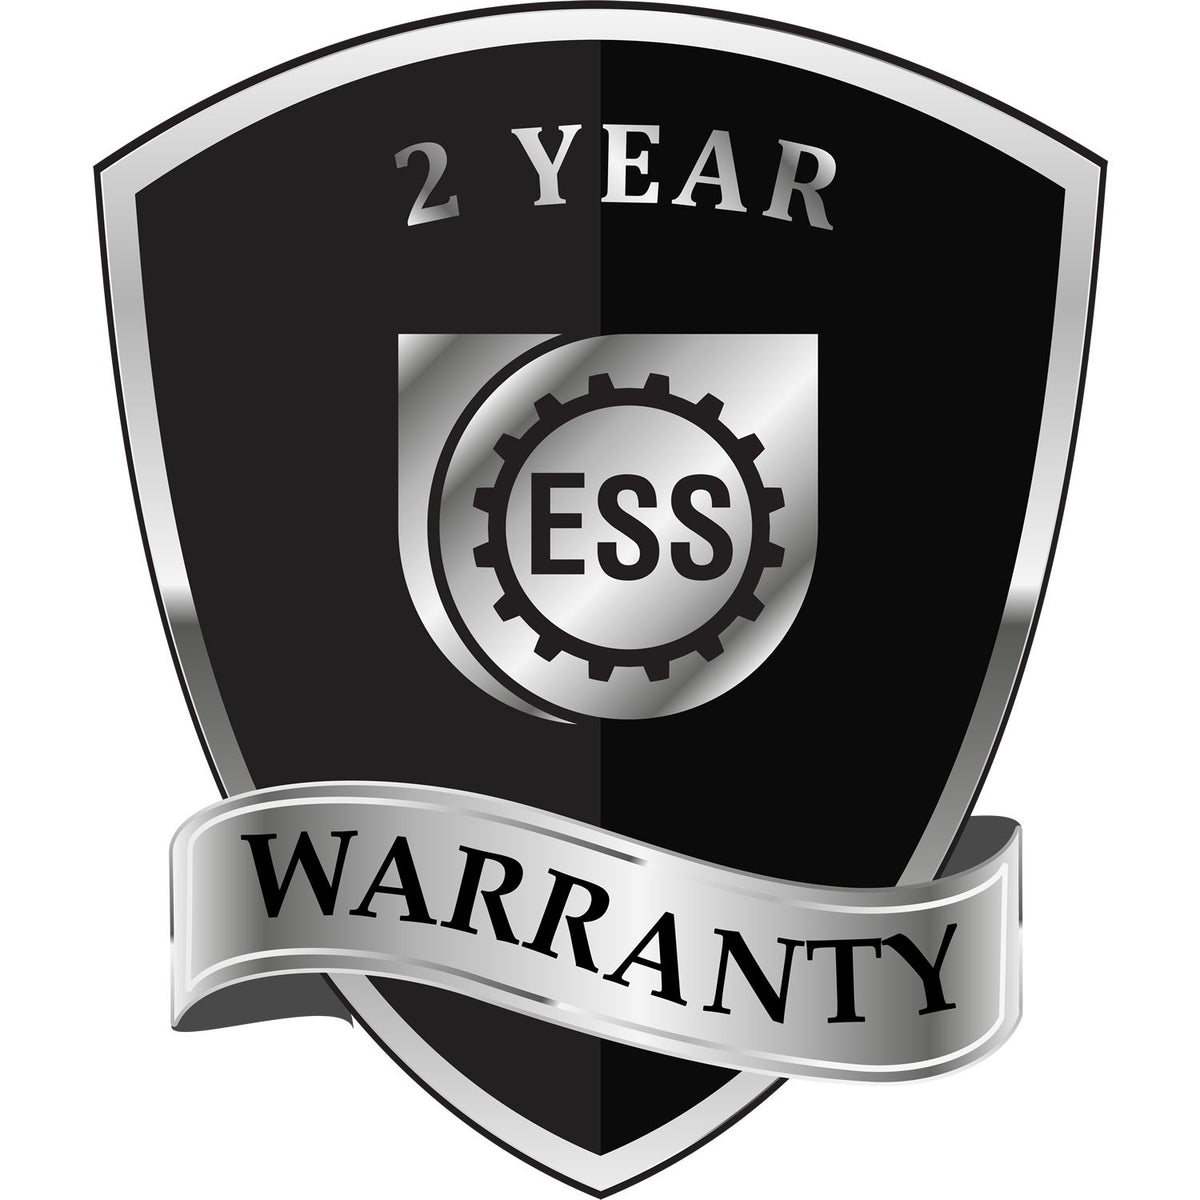 A badge or emblem showing a warranty icon for the Heavy Duty Cast Iron Texas Engineer Seal Embosser